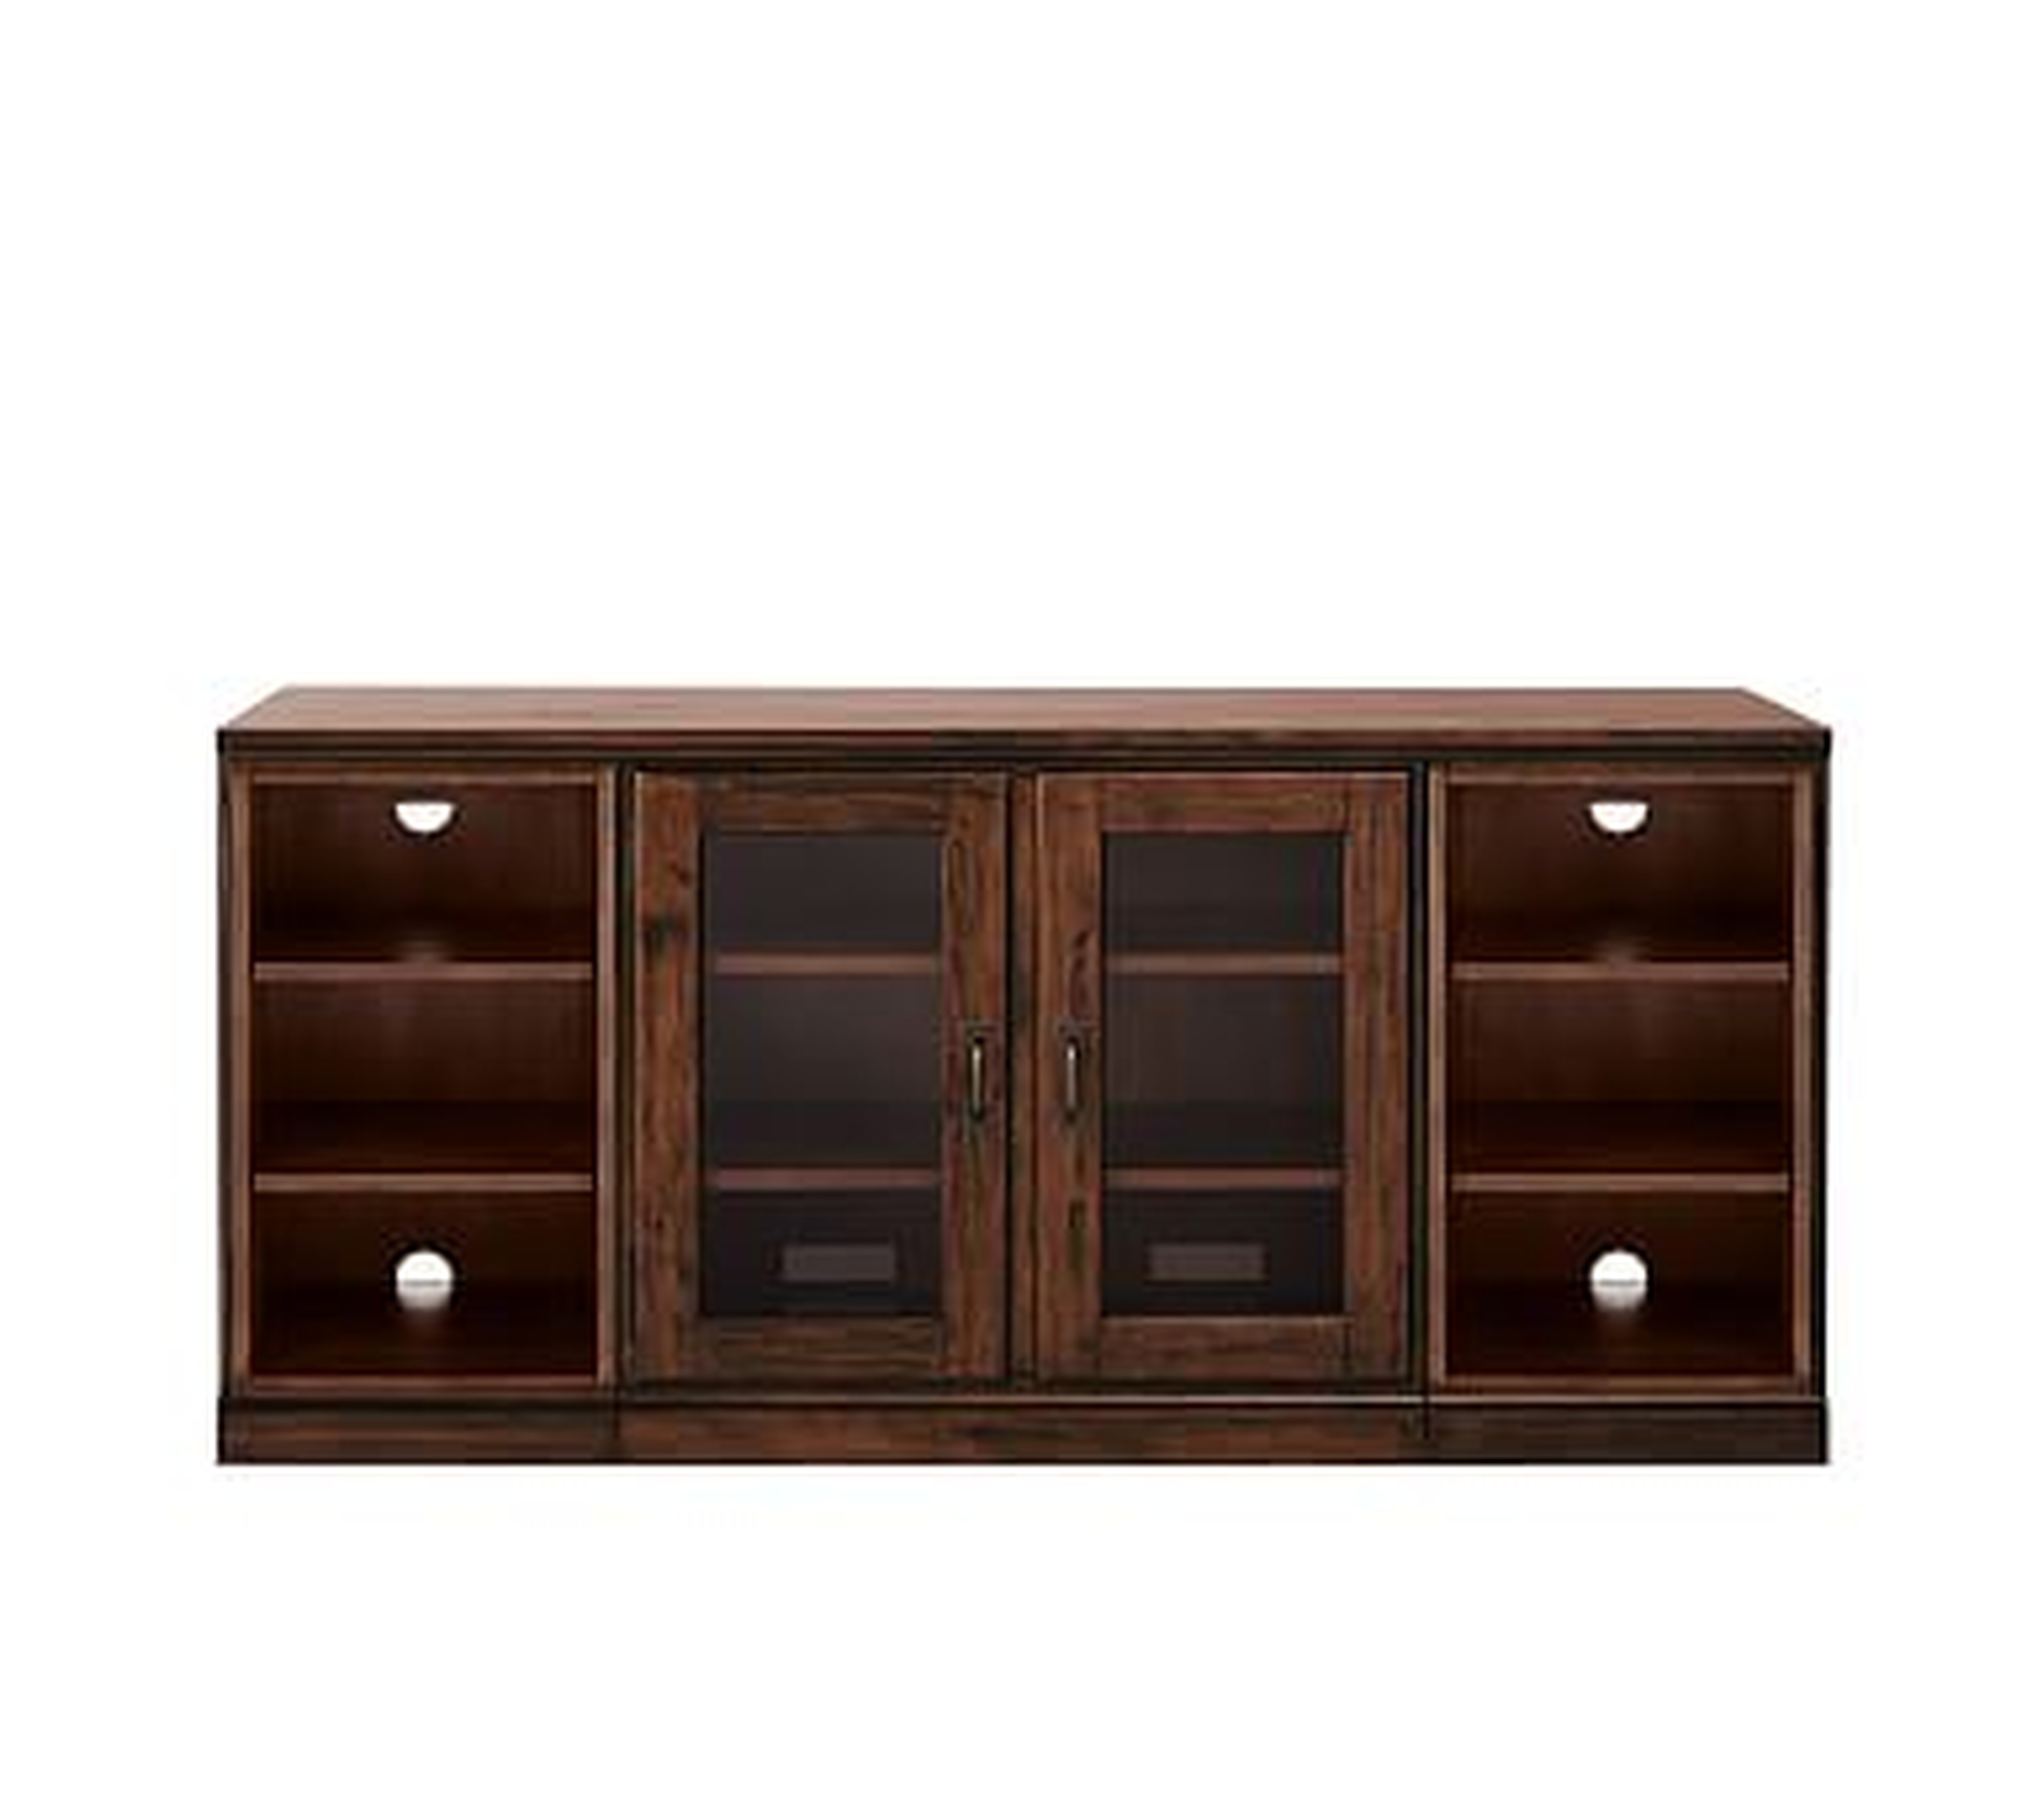 Printer's 3-Piece Media Console with Bookcases, 64", Tuscan Chestnut - Pottery Barn